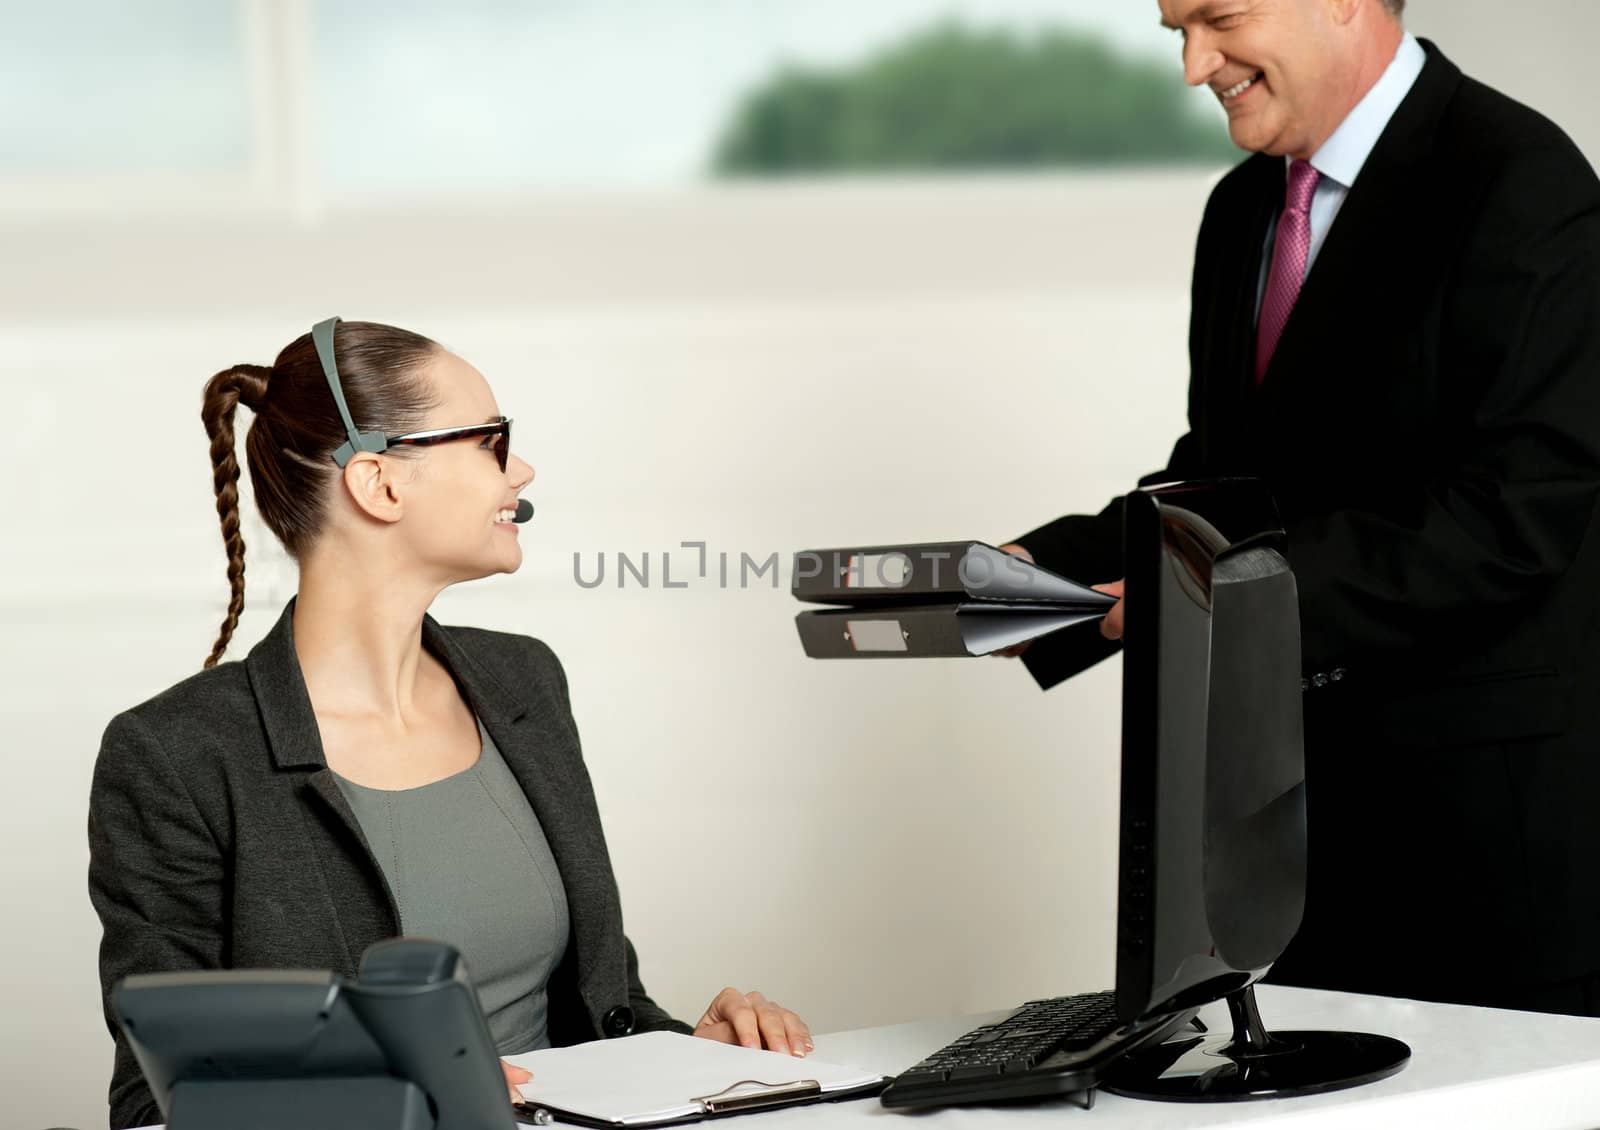 Business team of two working in office. Woman sitting in chair while man presenting files to her